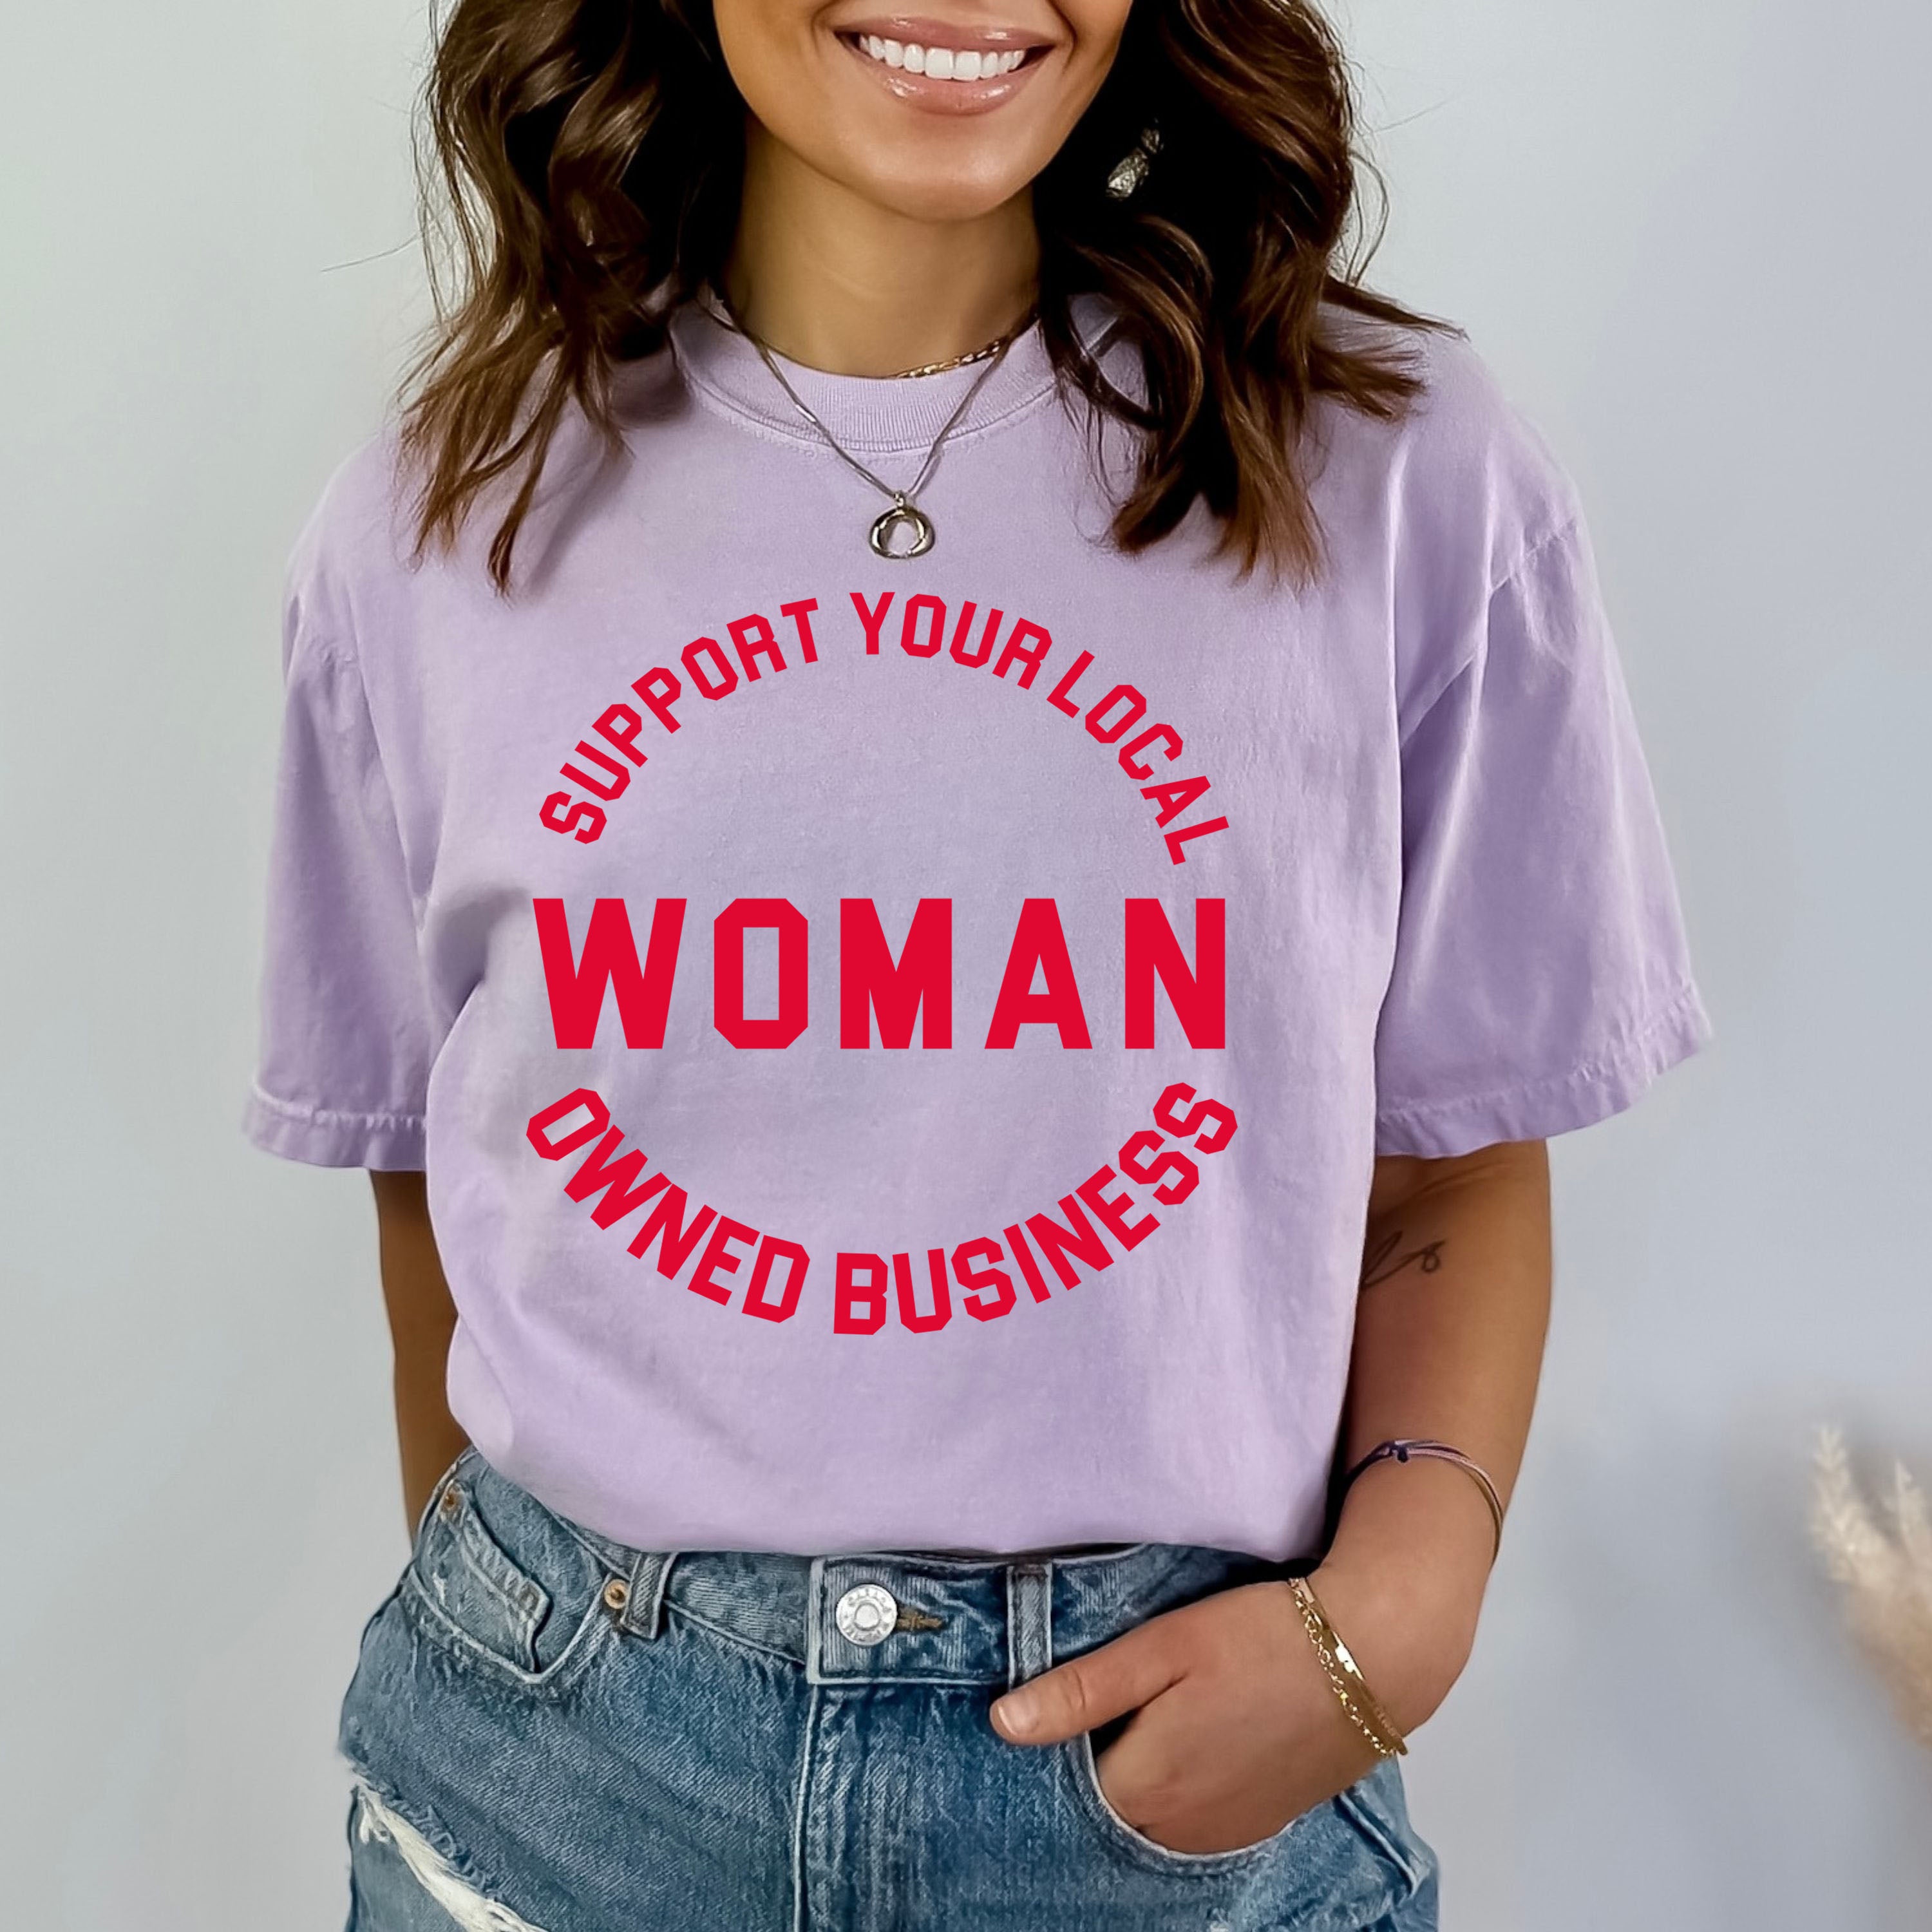 Support Your Local Woman - Bella canvas